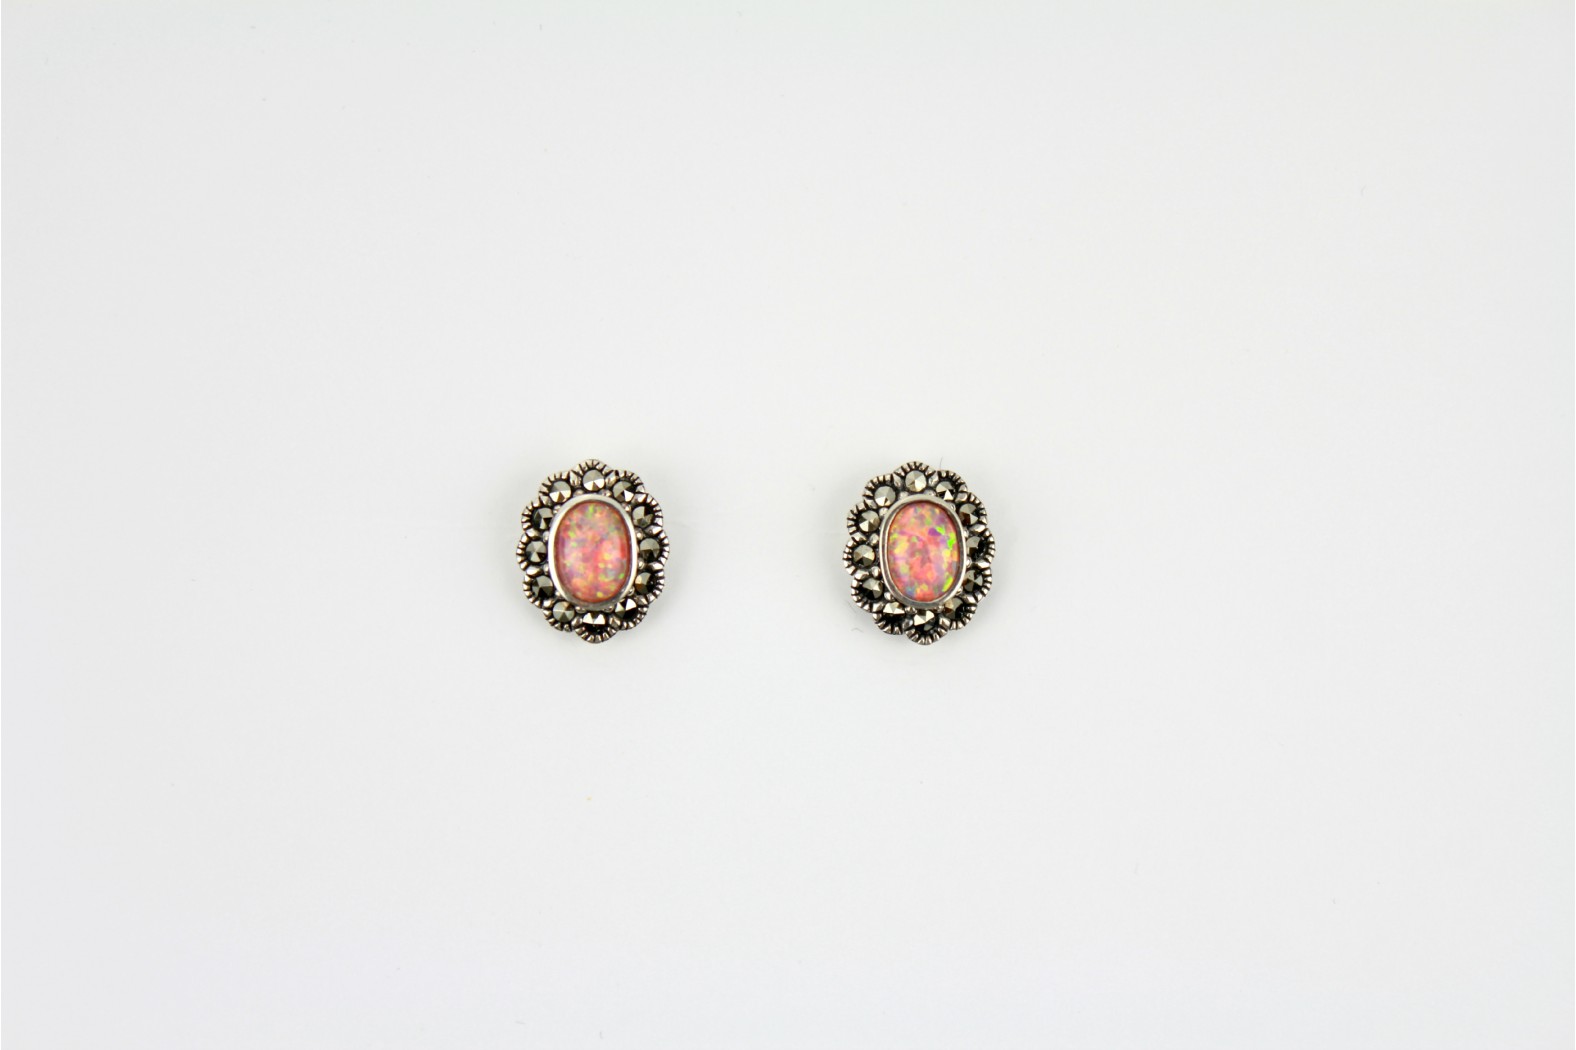 Gorgeous Coral Pink Opal Fire oval shaped studs surrounded with Marcasite stones